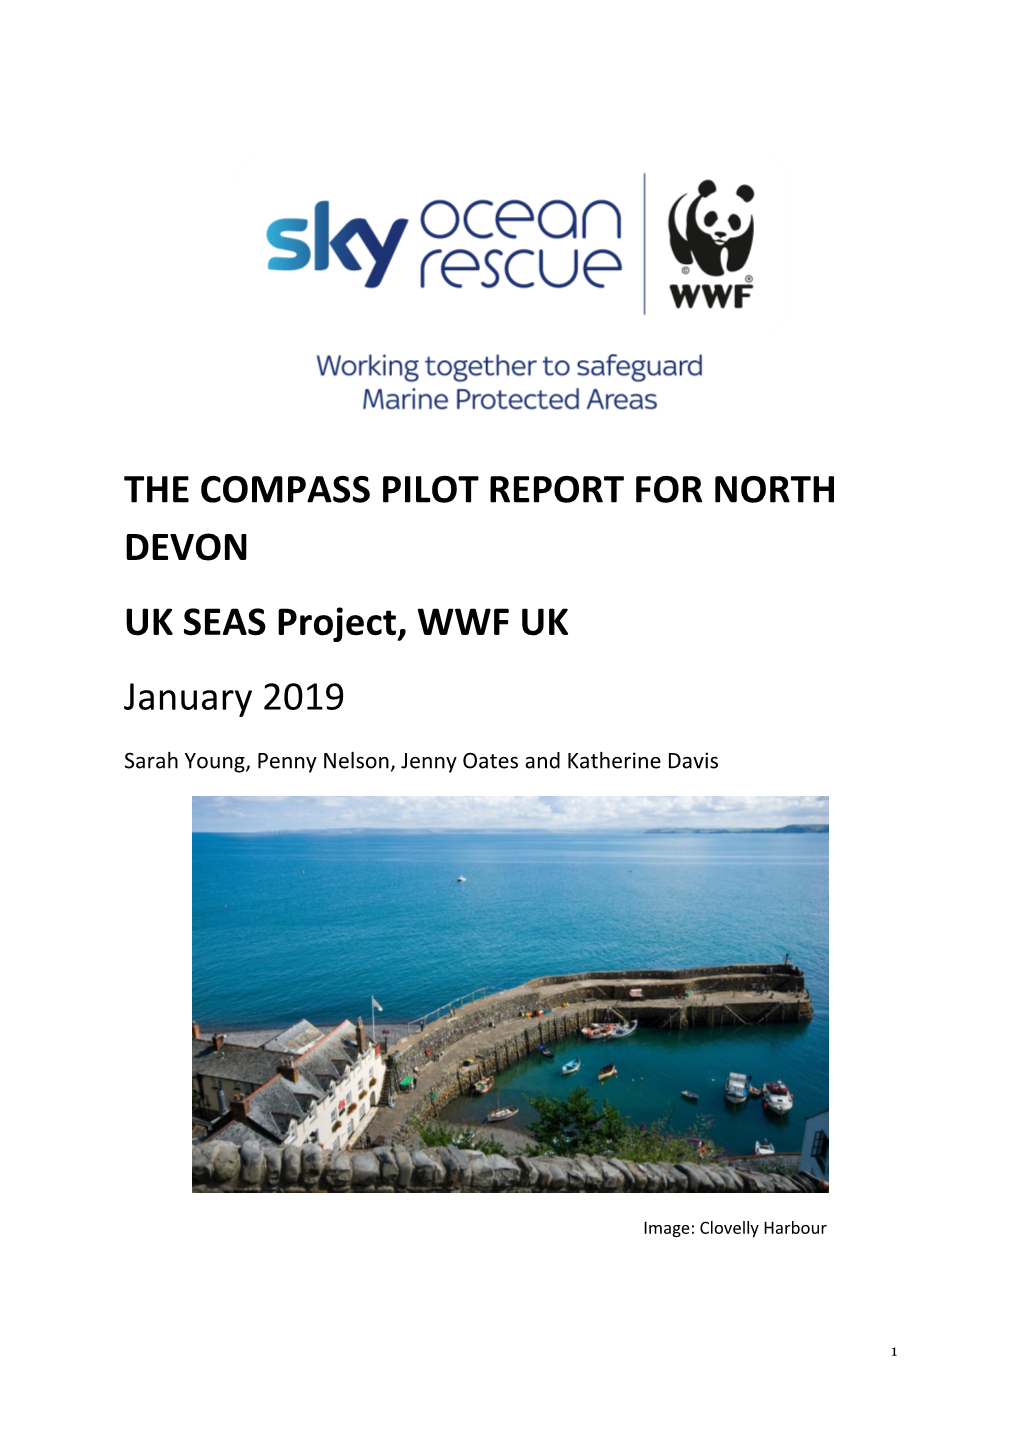 Report on the Compass Pilot for North Devon